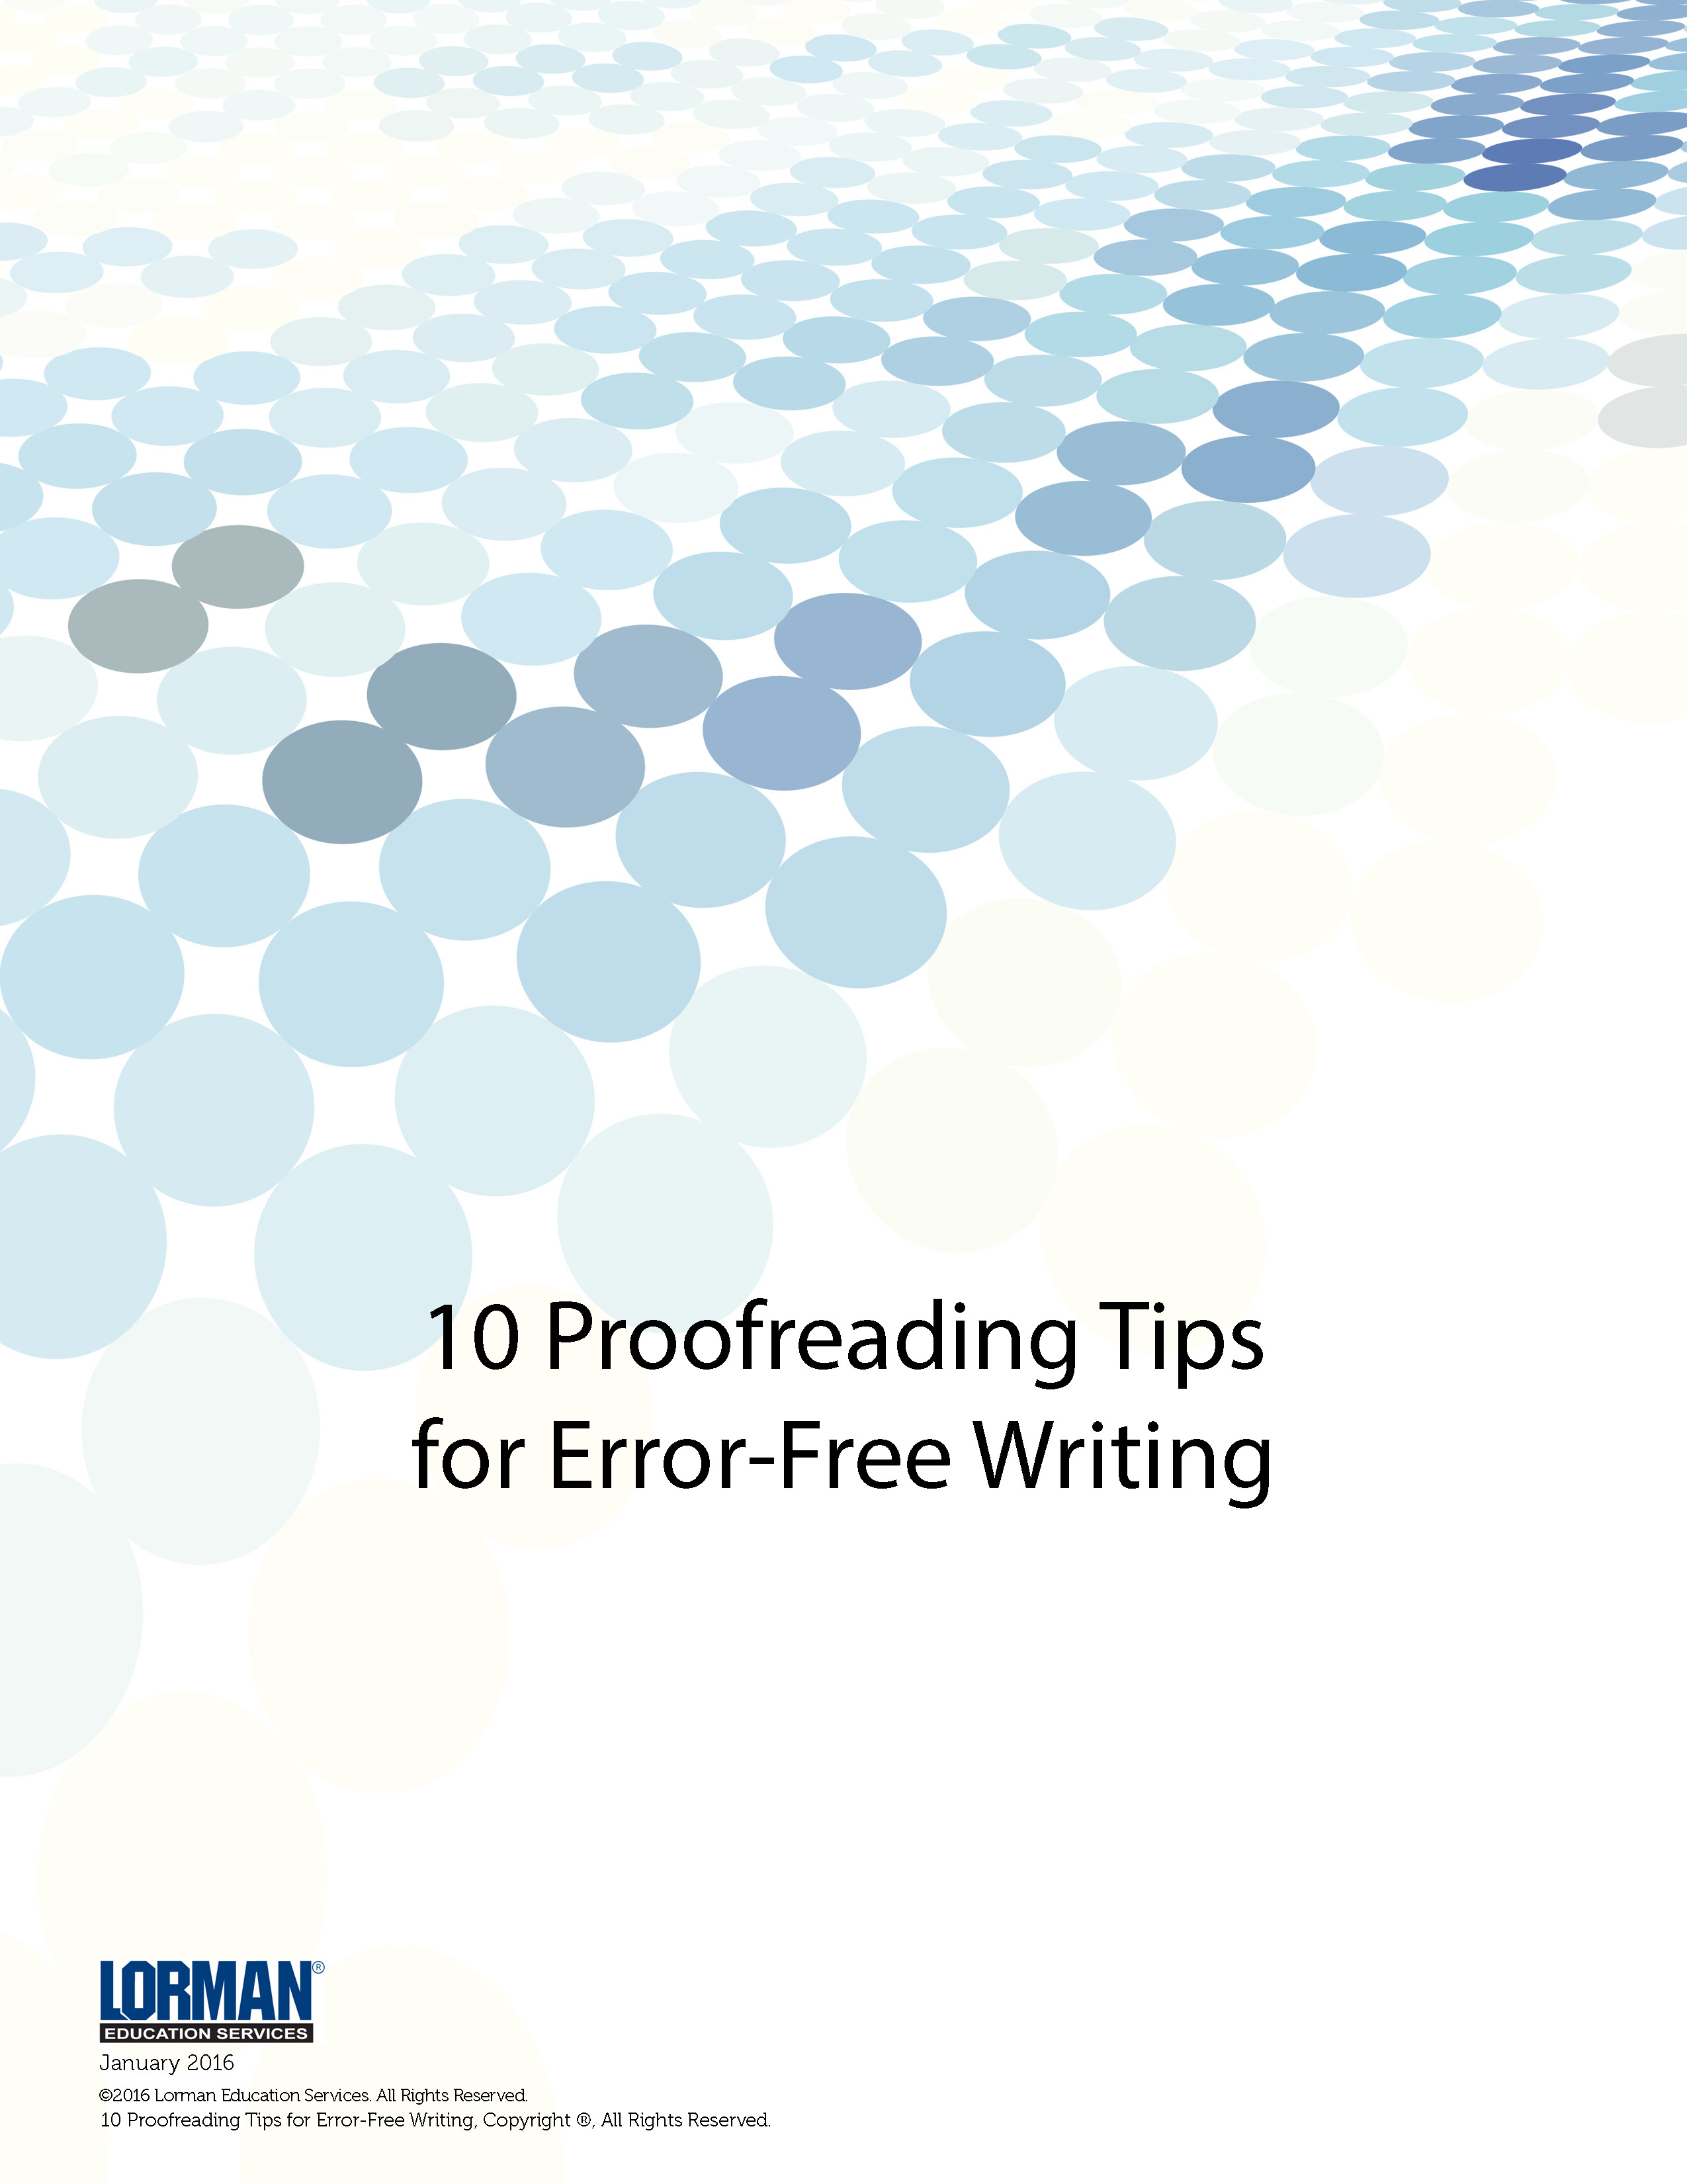 10 Proofreading Tips for Error-Free Writing